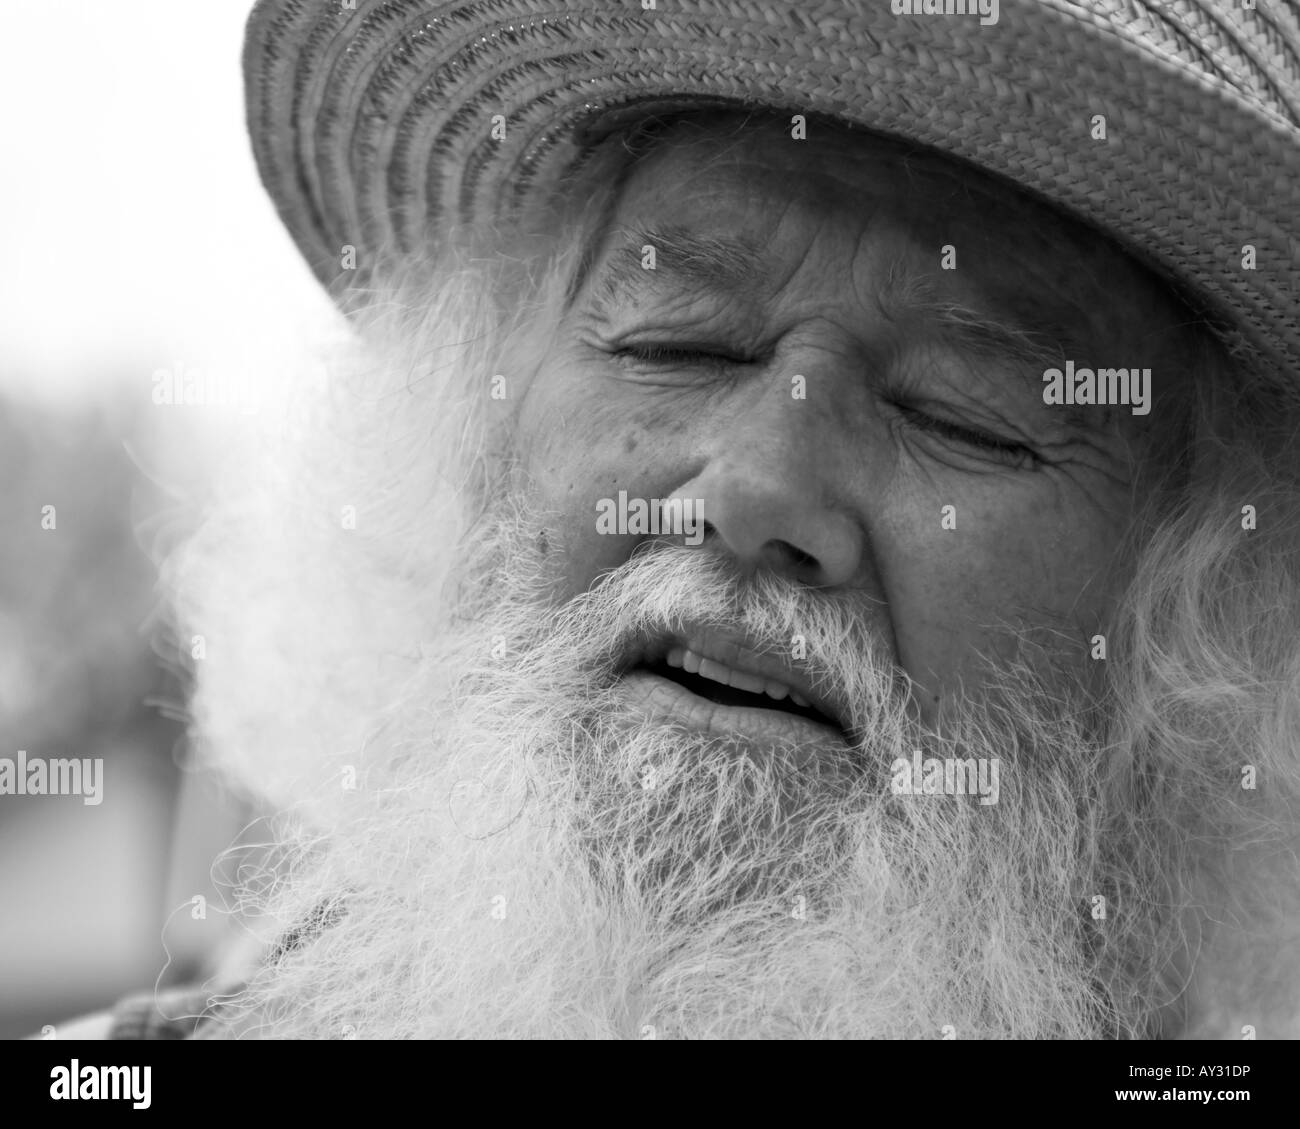 Old man long white hair and beard. Hat eyes closed expressive close up black & white thoughtful Stock Photo